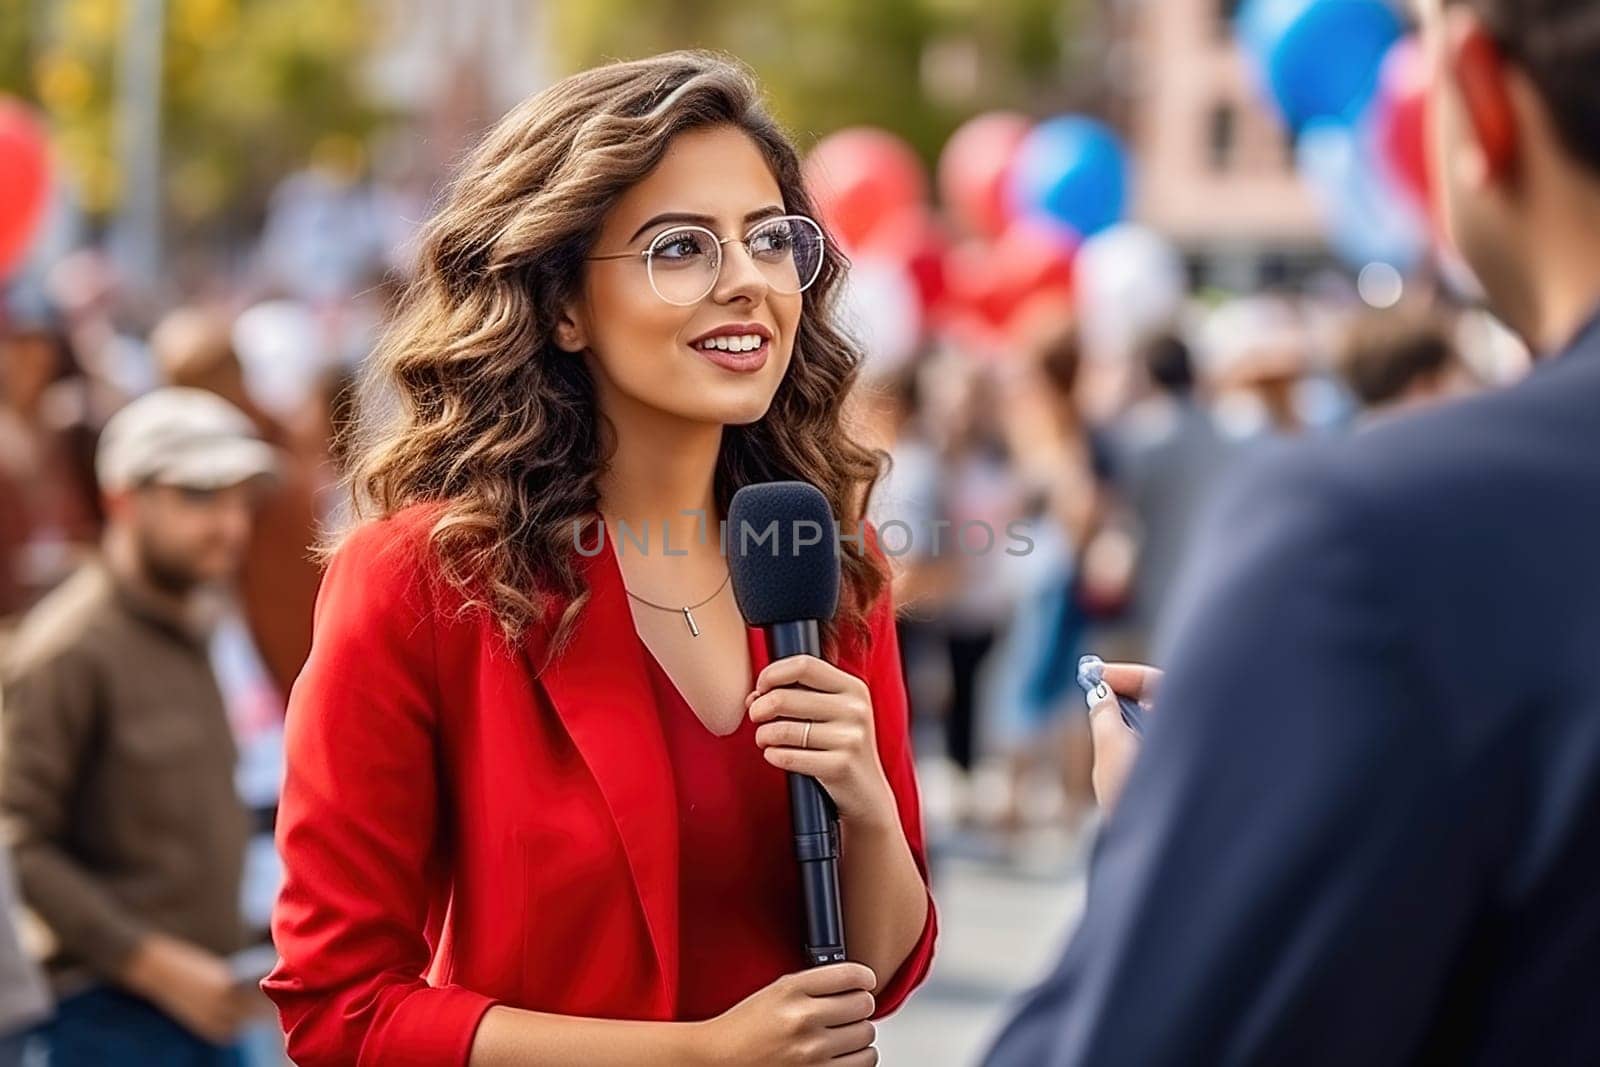 A woman with a microphone interviews people at a rally. by Yurich32